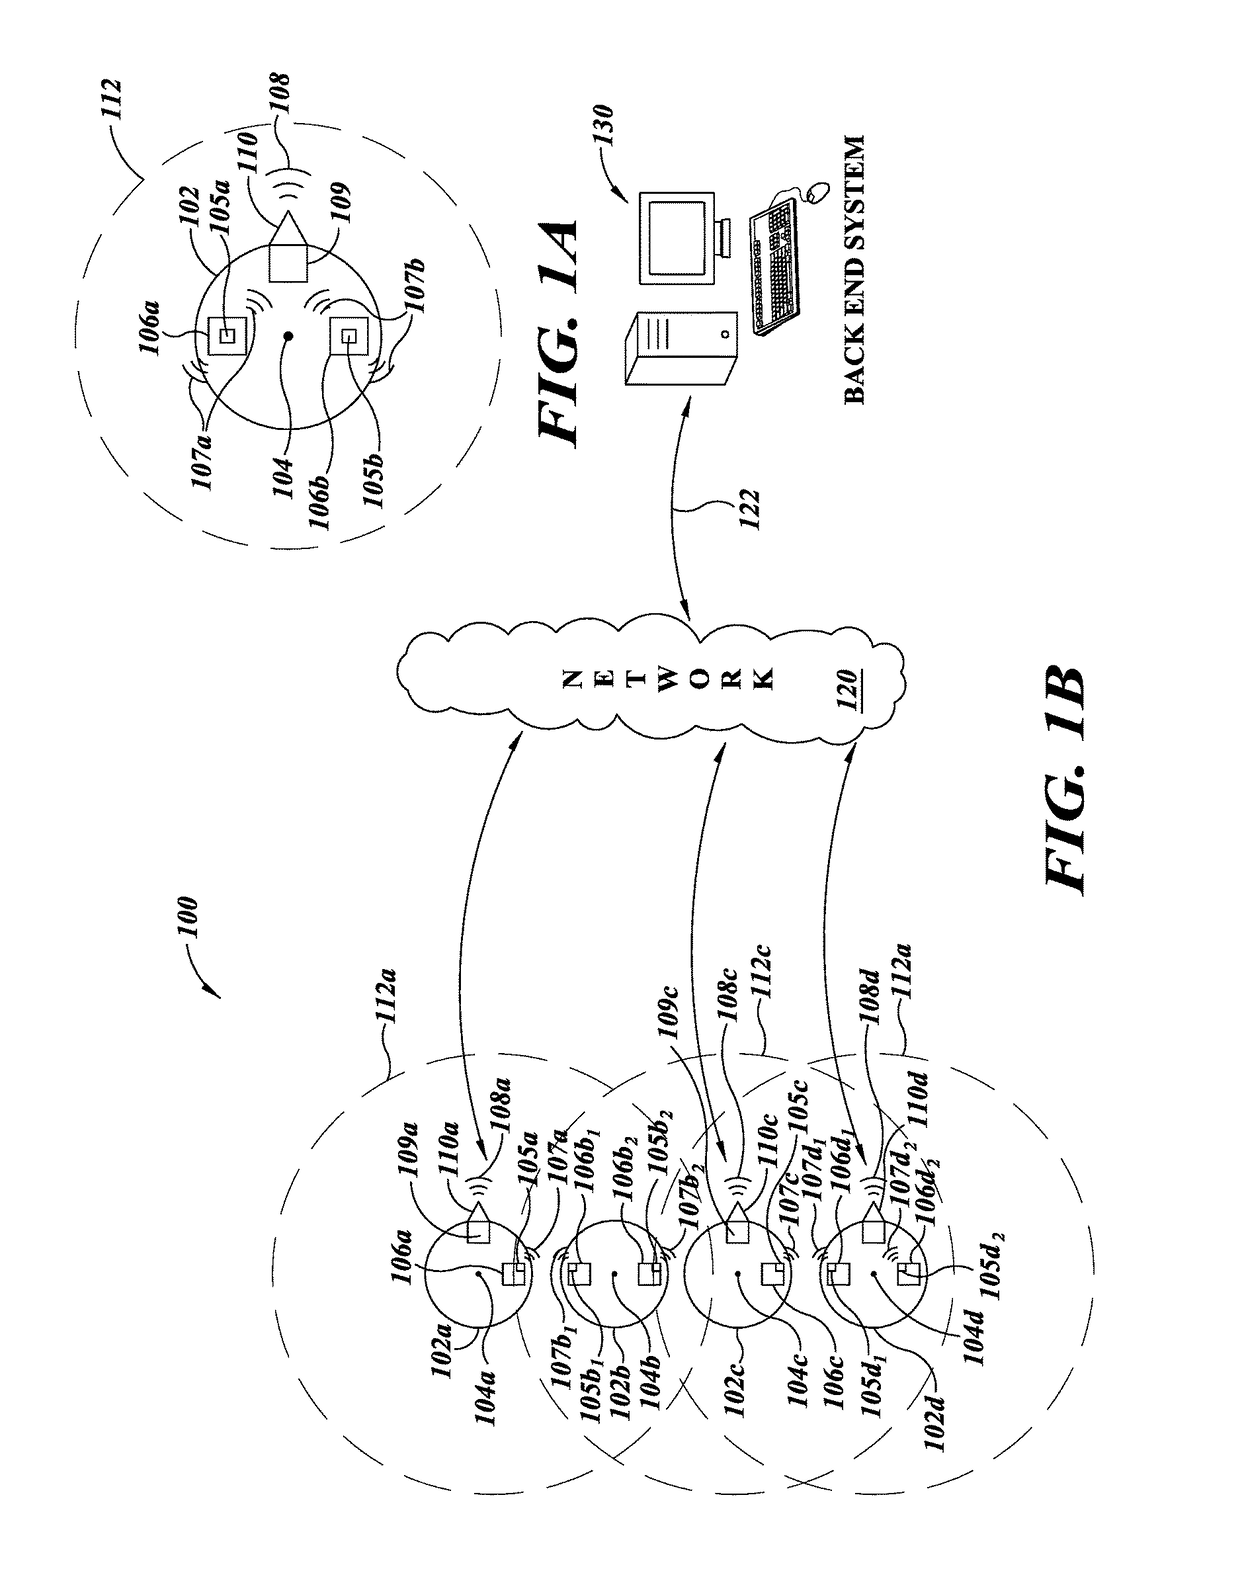 Systems and methods for asset tracking using an ad-hoc mesh network of mobile devices